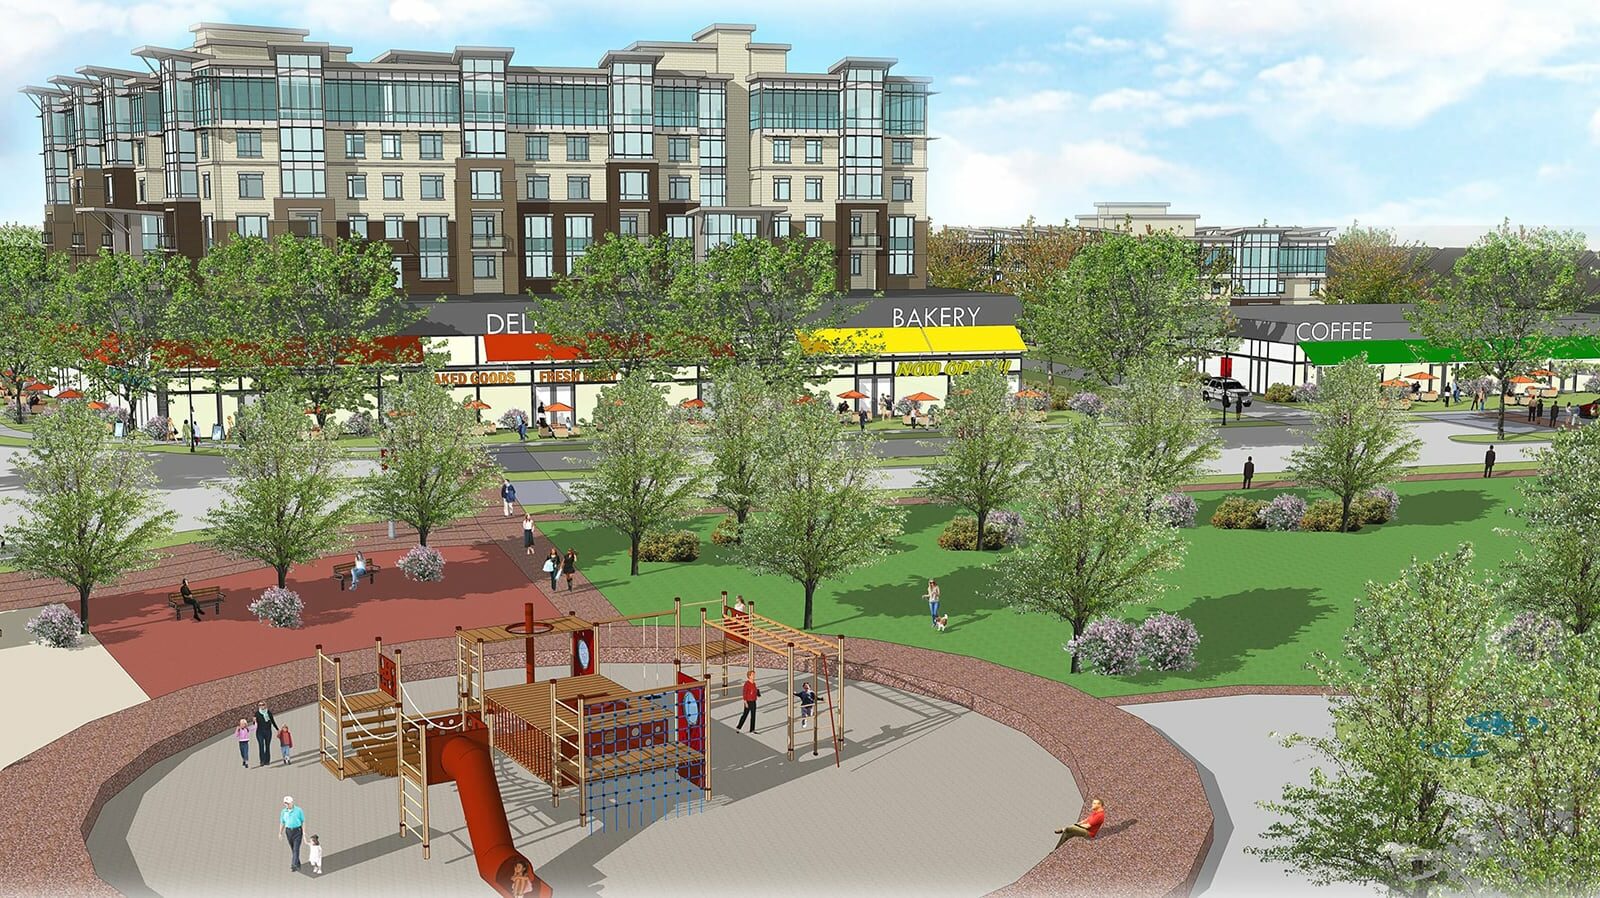 A rendering of a playground with commercial buildings nearby.